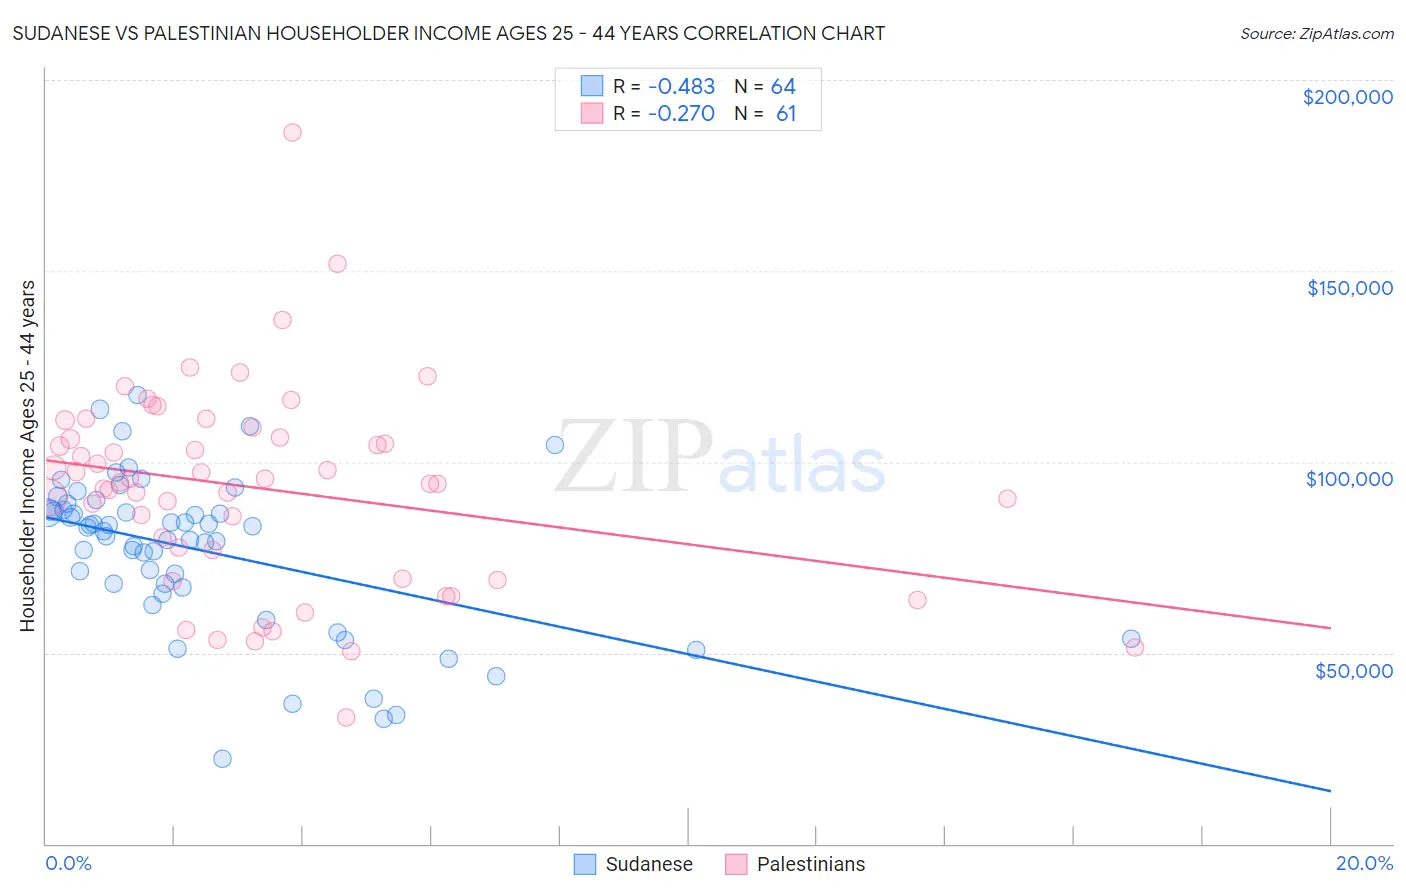 Sudanese vs Palestinian Householder Income Ages 25 - 44 years